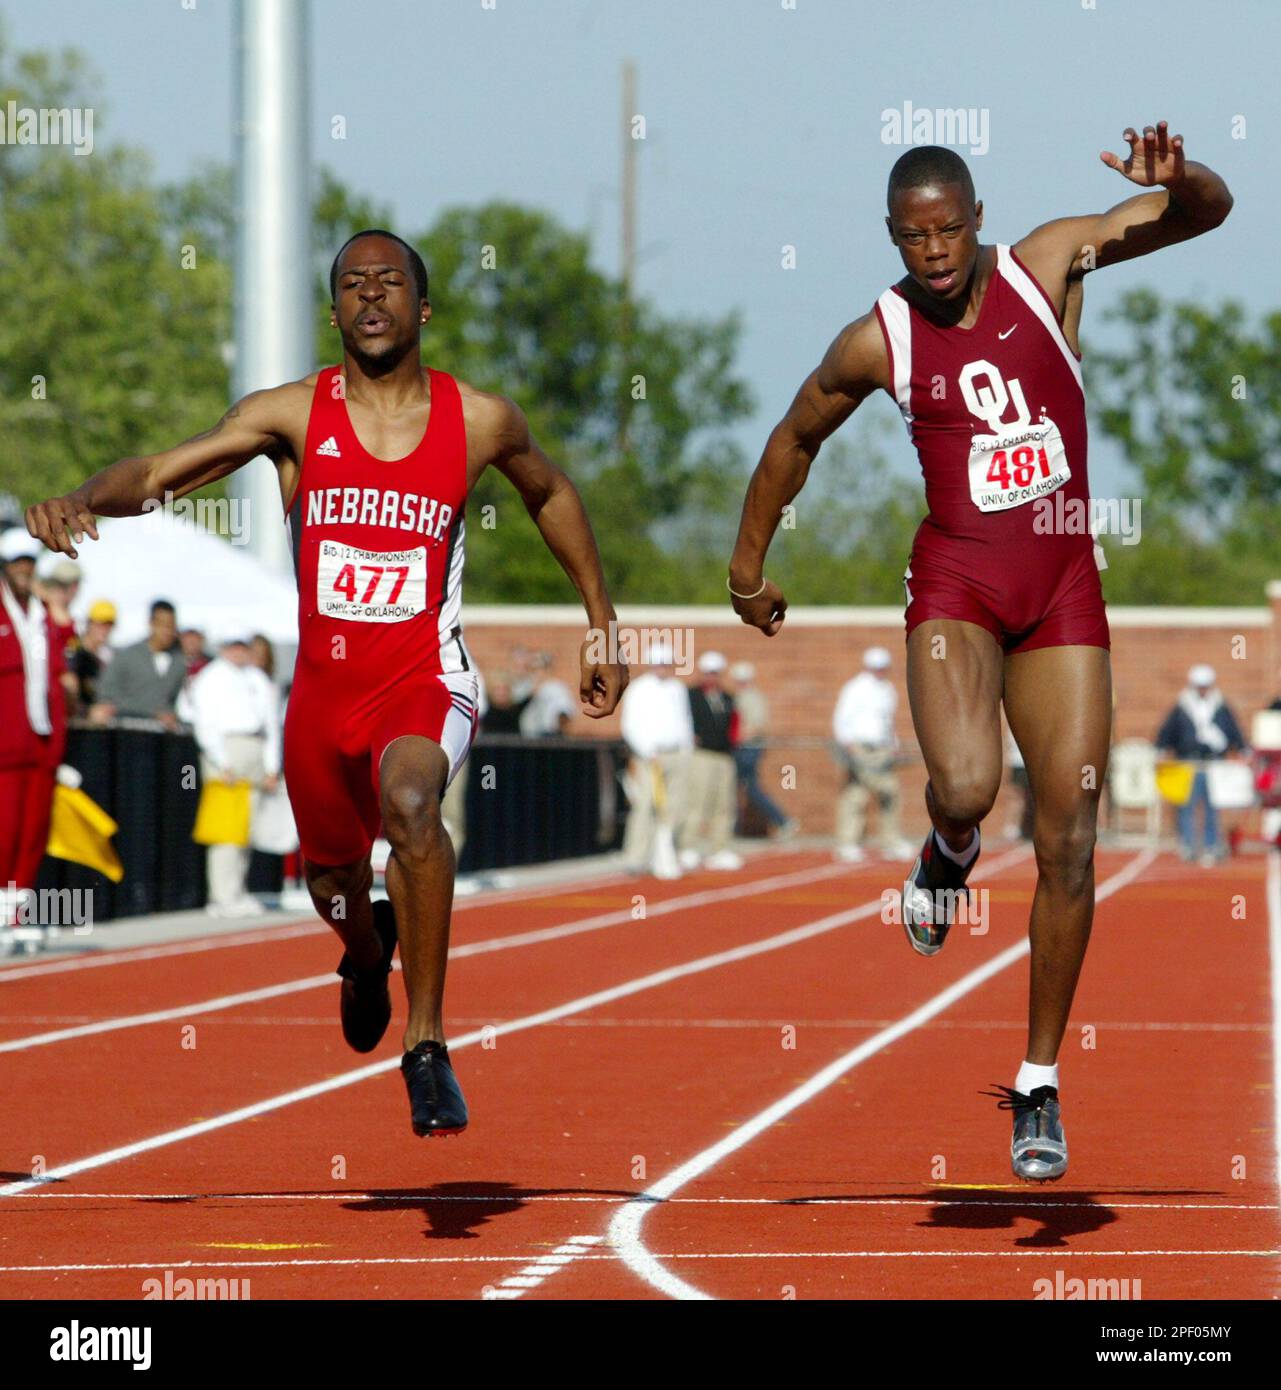 https://c8.alamy.com/comp/2PF05MY/oklahomas-dabryan-blanton-right-wins-the-mens-100-meter-dash-ahead-of-nebraskas-oliver-williams-jr-left-who-finished-third-at-the-big-12-outdoor-track-and-field-championships-in-norman-okla-saturday-may-1-2004-blanton-won-the-event-with-a-time-of-1091-seconds-ap-photosue-ogrocki-2PF05MY.jpg